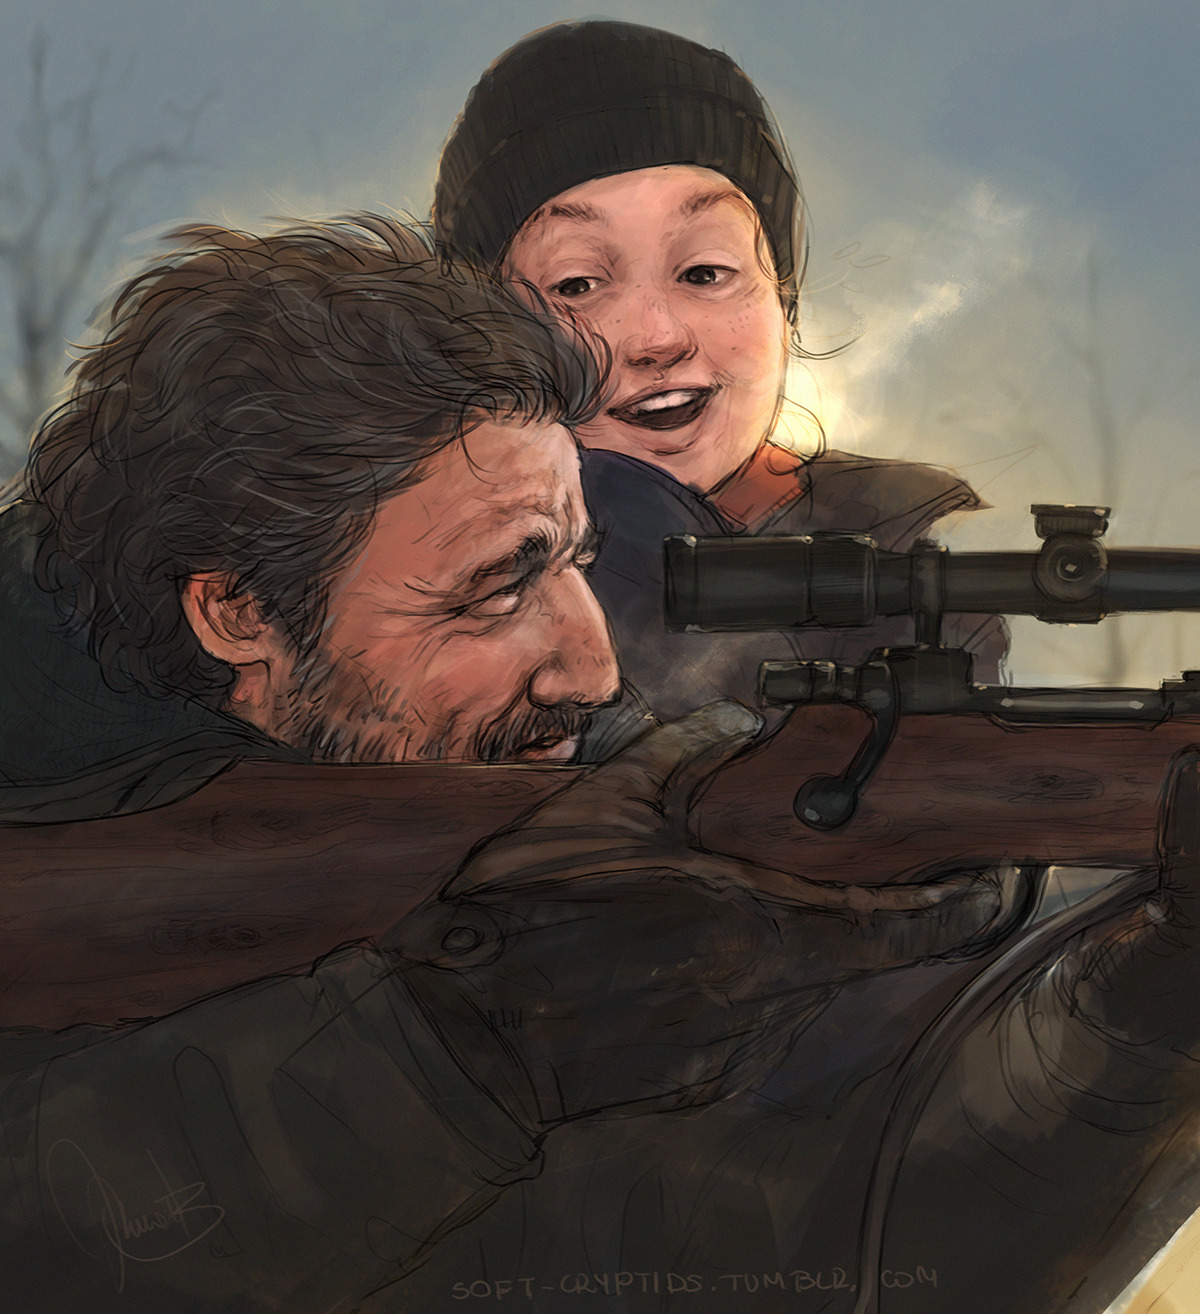 saintitchief on X: The artist who drew this fan art of Joel and Ellie from  HBO's The Last of Us got flamed so hard on twitter that he apologized and  redrew Ellie's